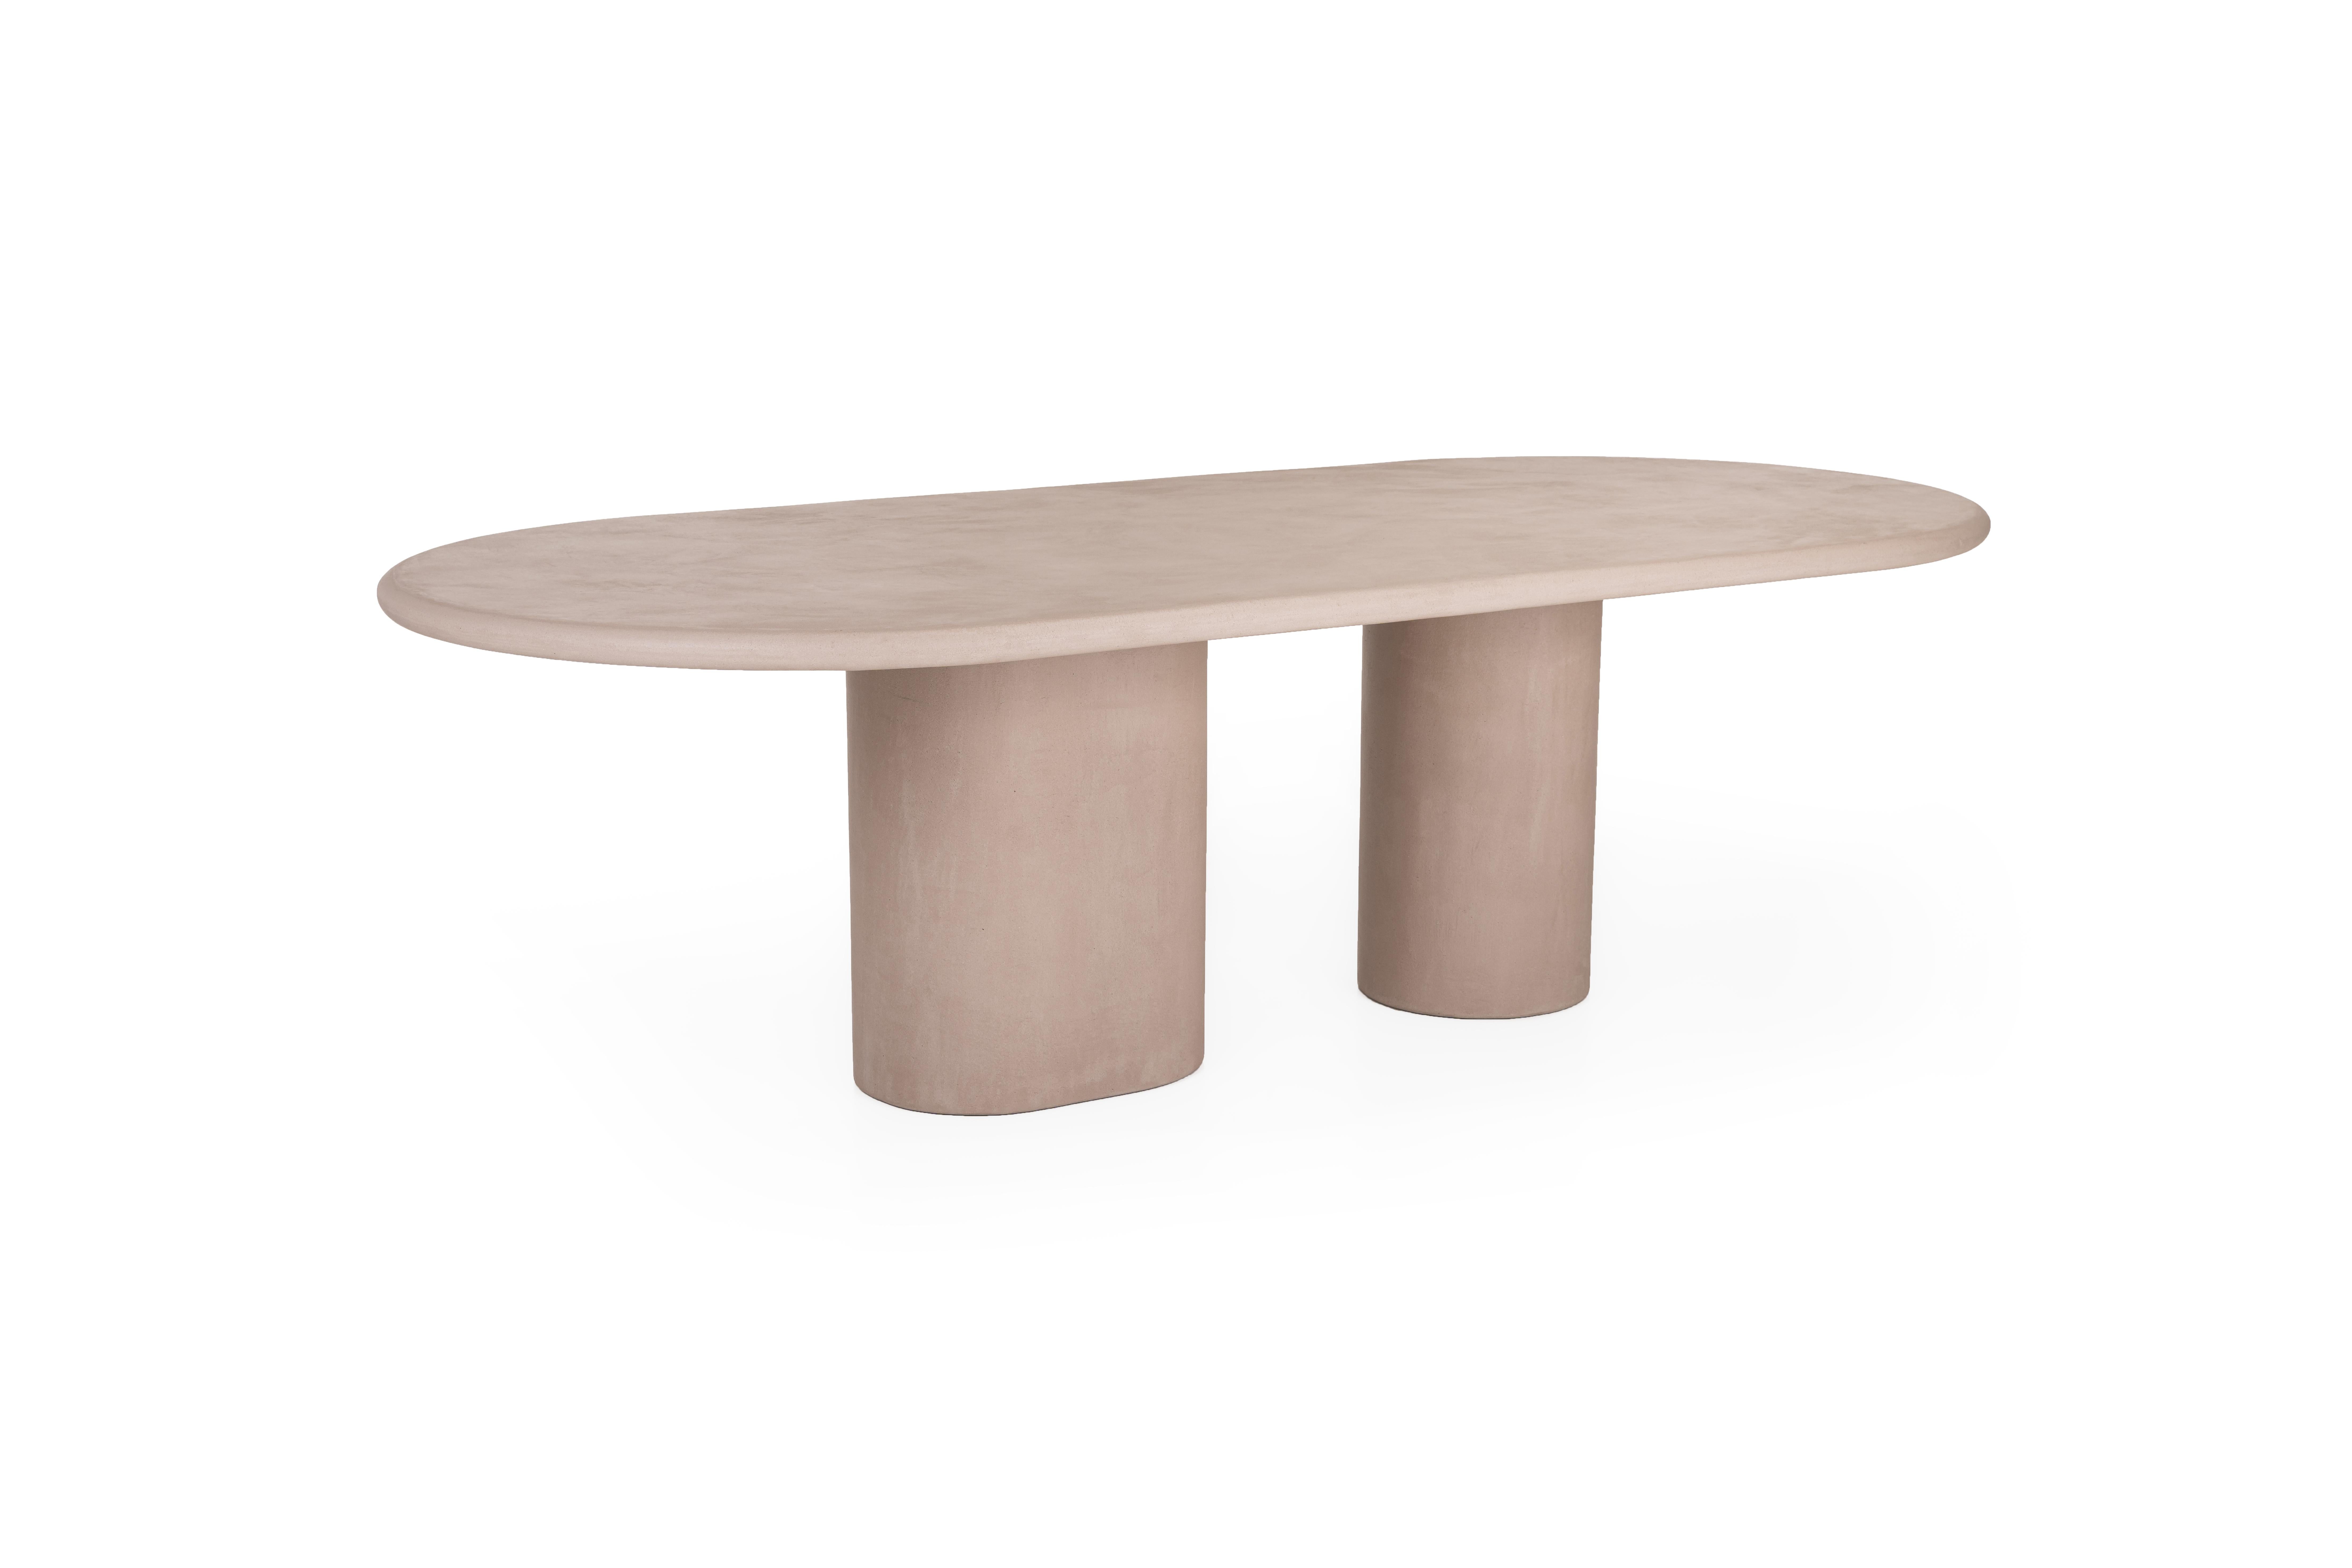 Contemporary Belgian design, handmade natural plaster table with a textured and earthy character.

Indoor use (price outdoor +10%)

Latin adjective “columna” /koˈlum. na/: column, pillar

The Column dining table is handcrafted with multiple layers